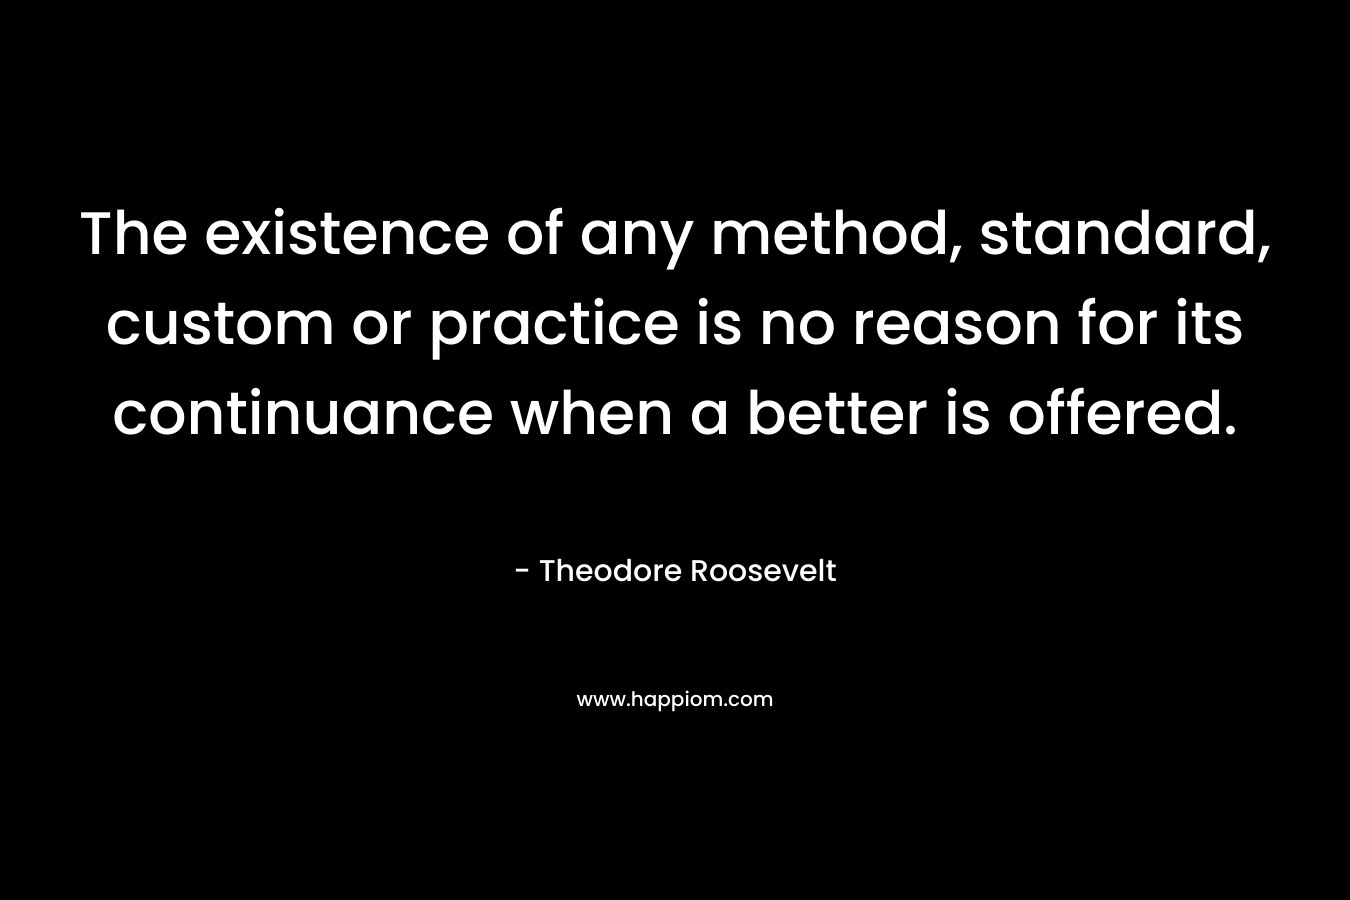 The existence of any method, standard, custom or practice is no reason for its continuance when a better is offered.